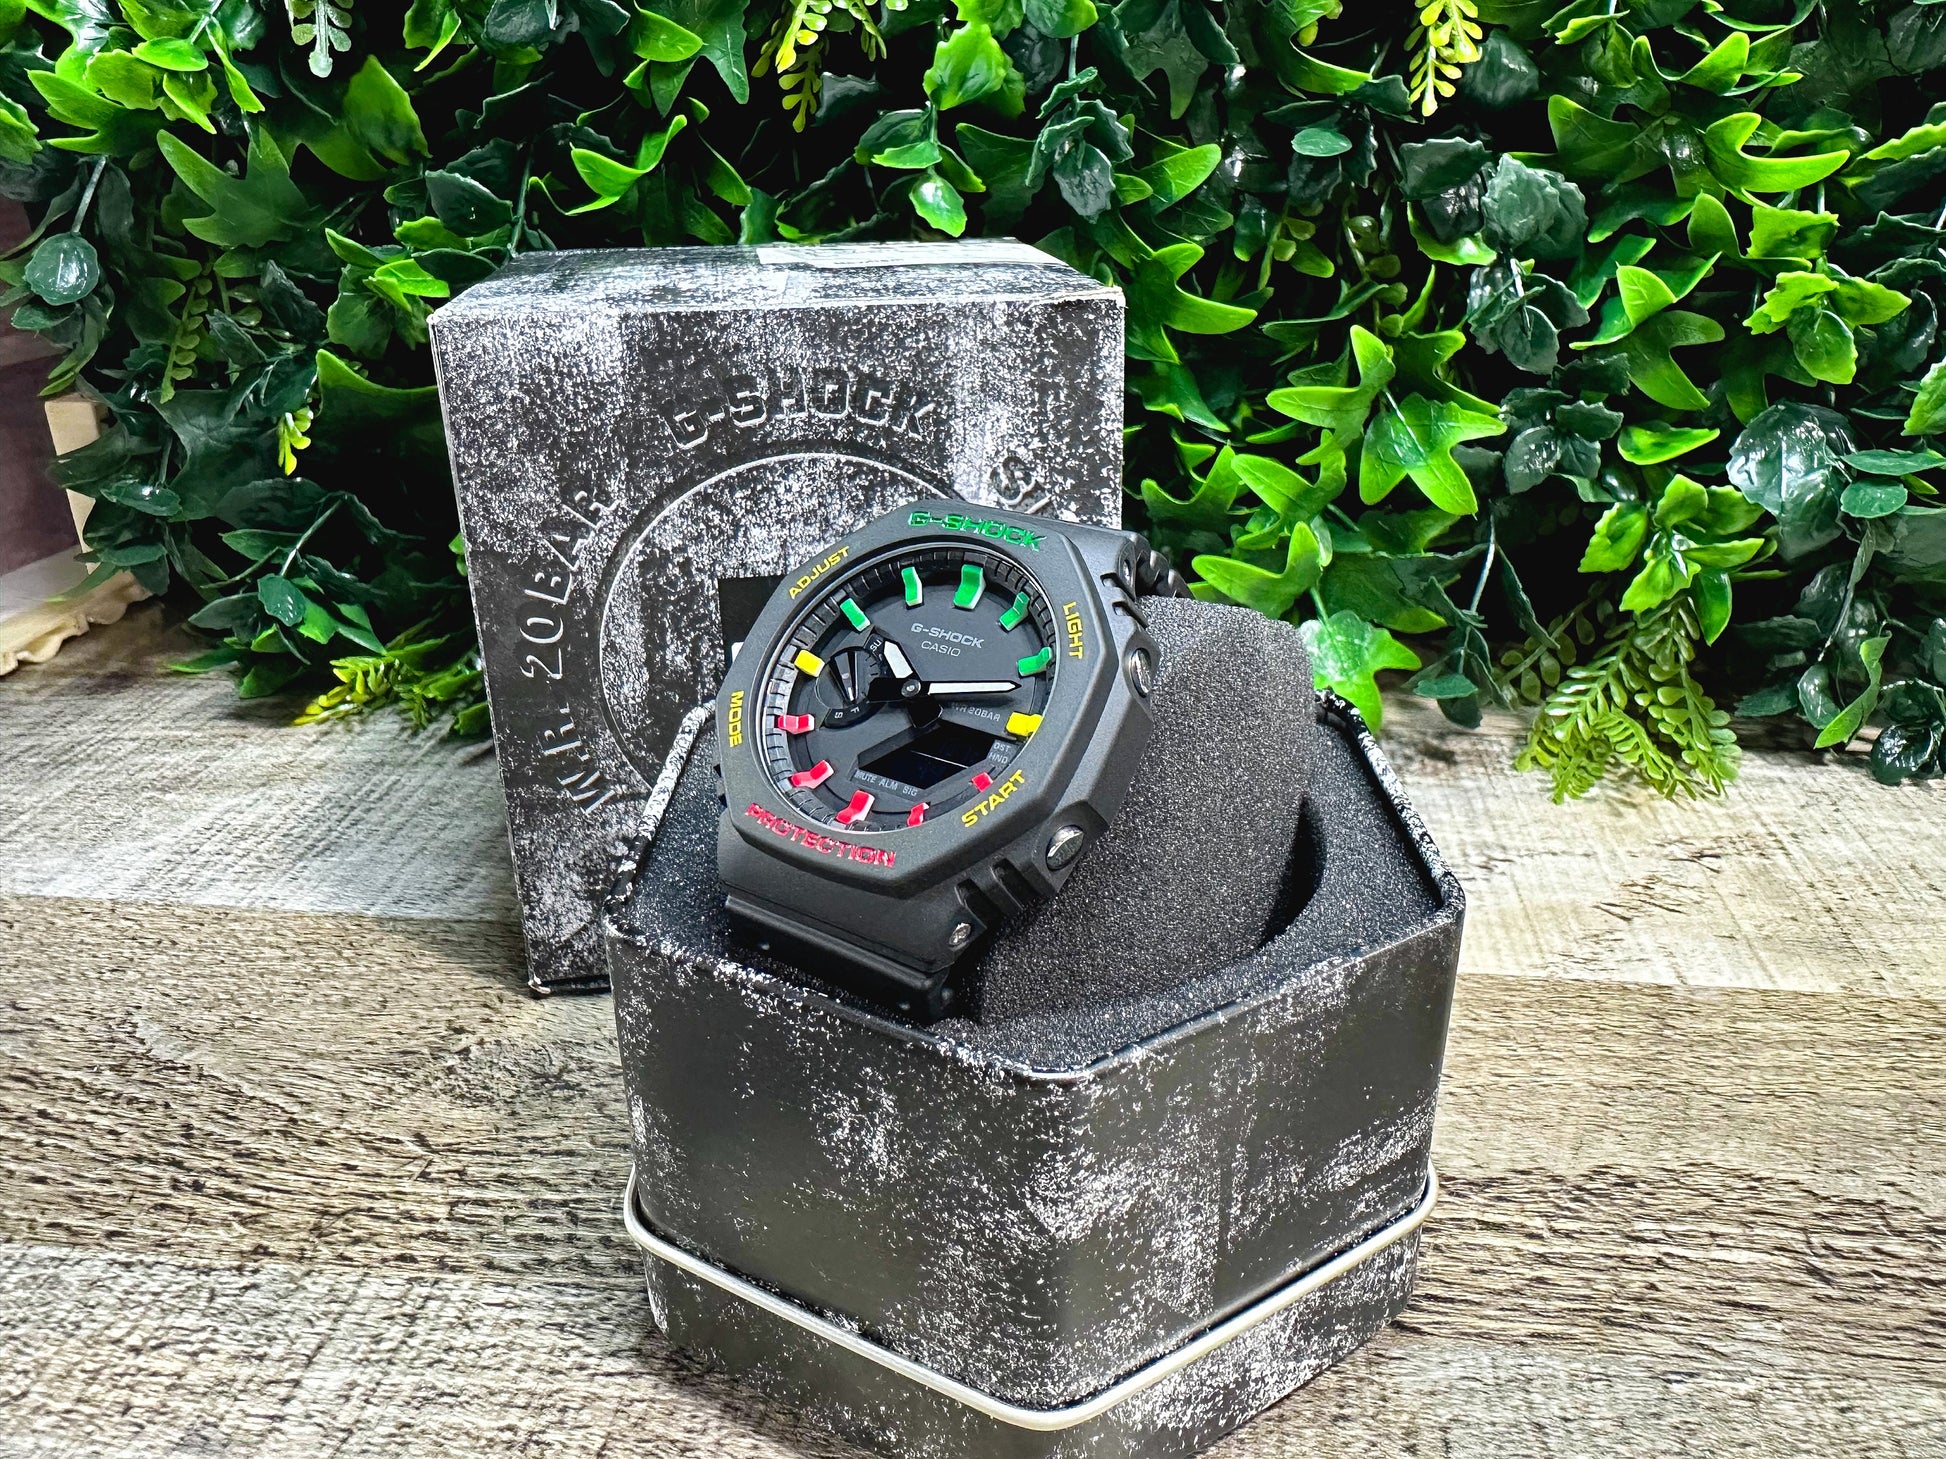 G-Shock CasiOak "Rasta" - Red/Green/Yellow Hand Painted Genuine Casio GA2100 - Carbon Core Protection - Optional Sapphire Crystal